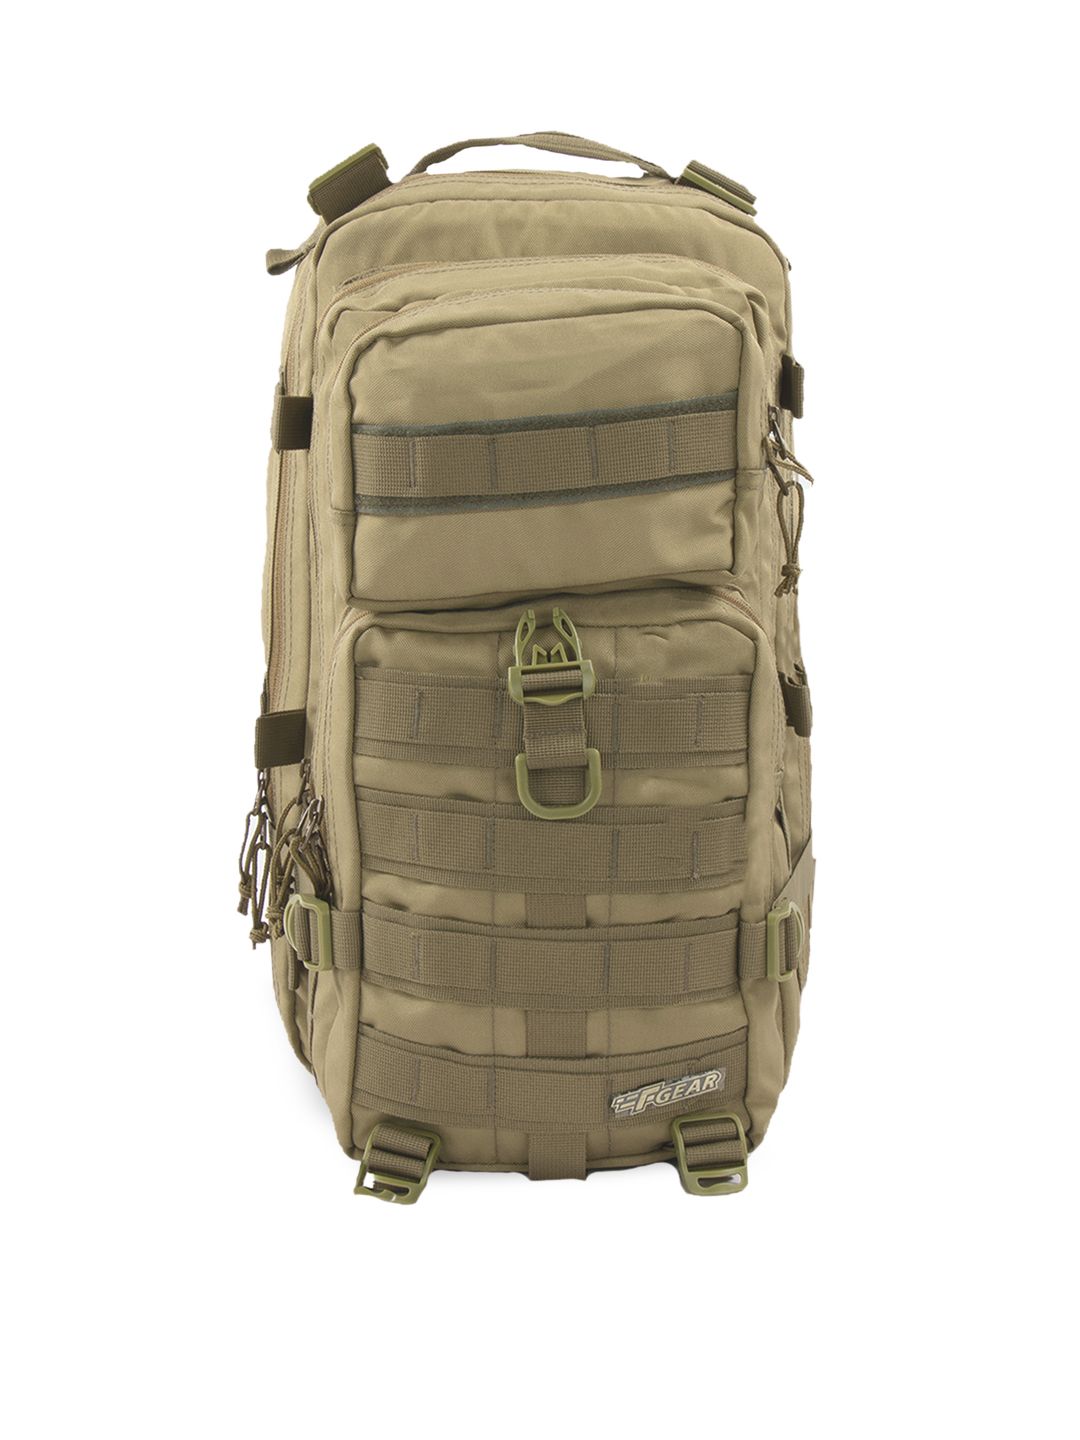 F Gear Unisex Khaki Green Military Tactical Solid Backpack Price in India